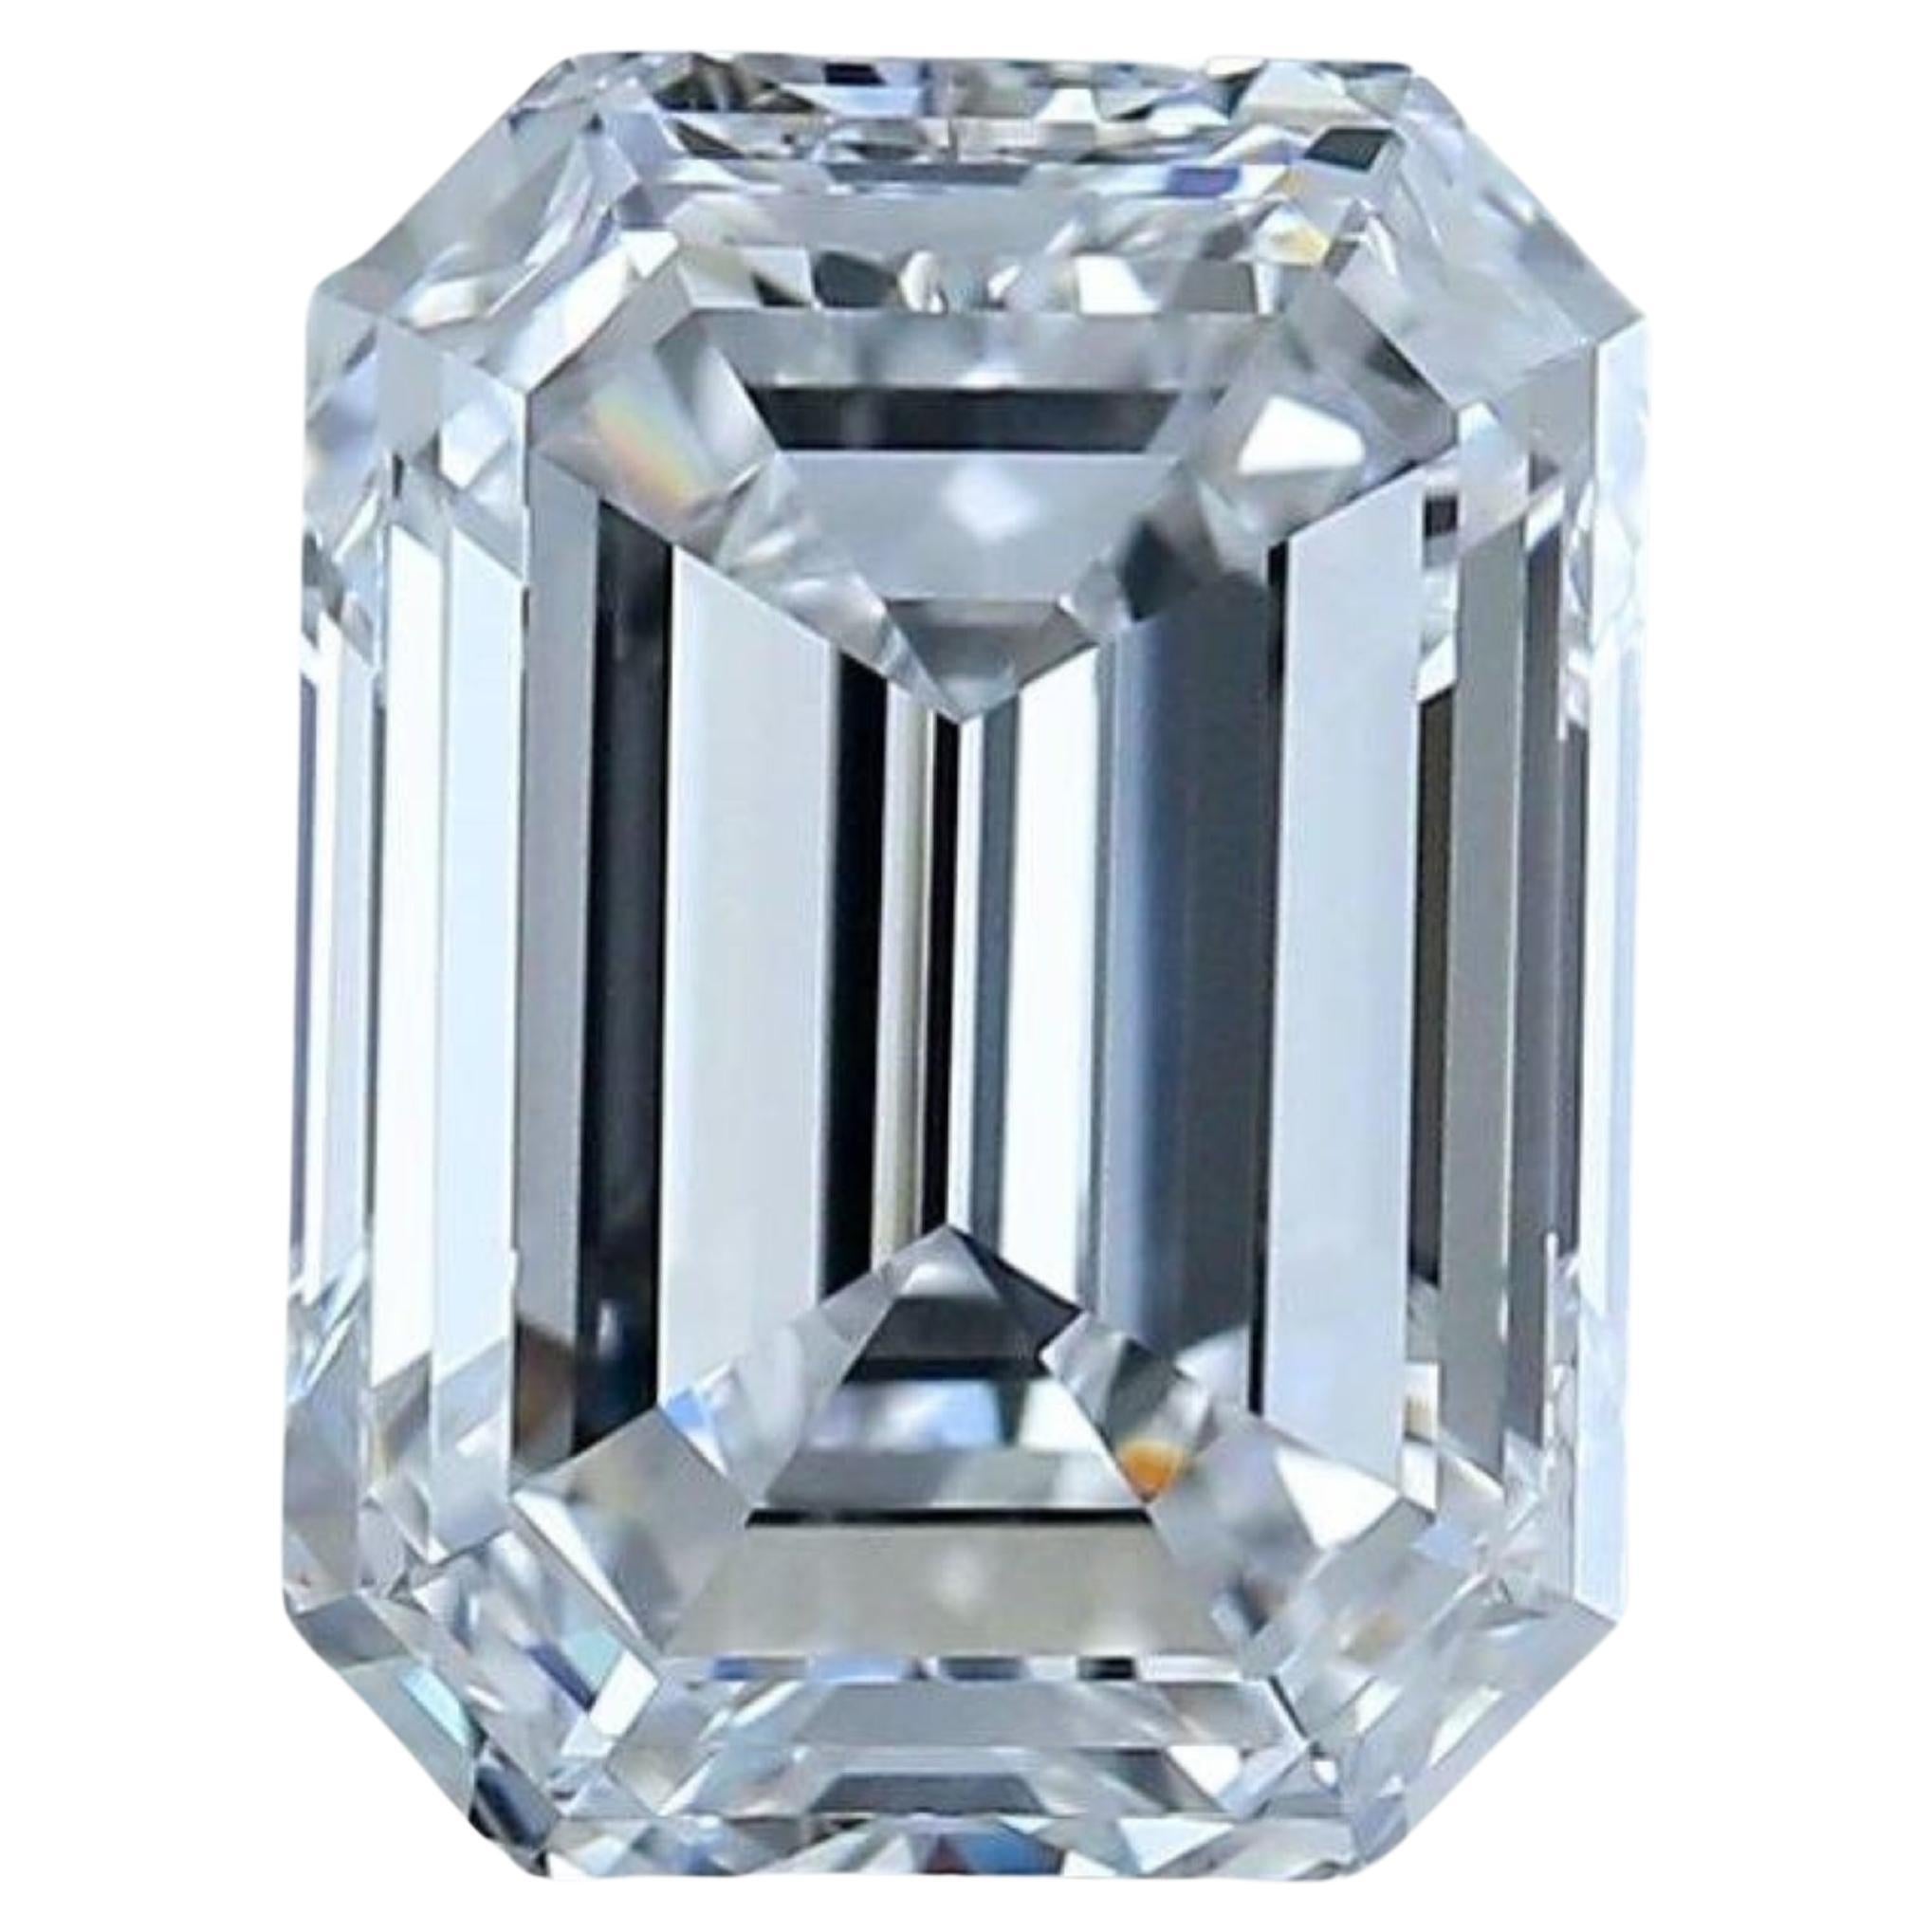 1 pc. Shimmering 4.01 Carat Emerald Cut Natural Diamond For Sale